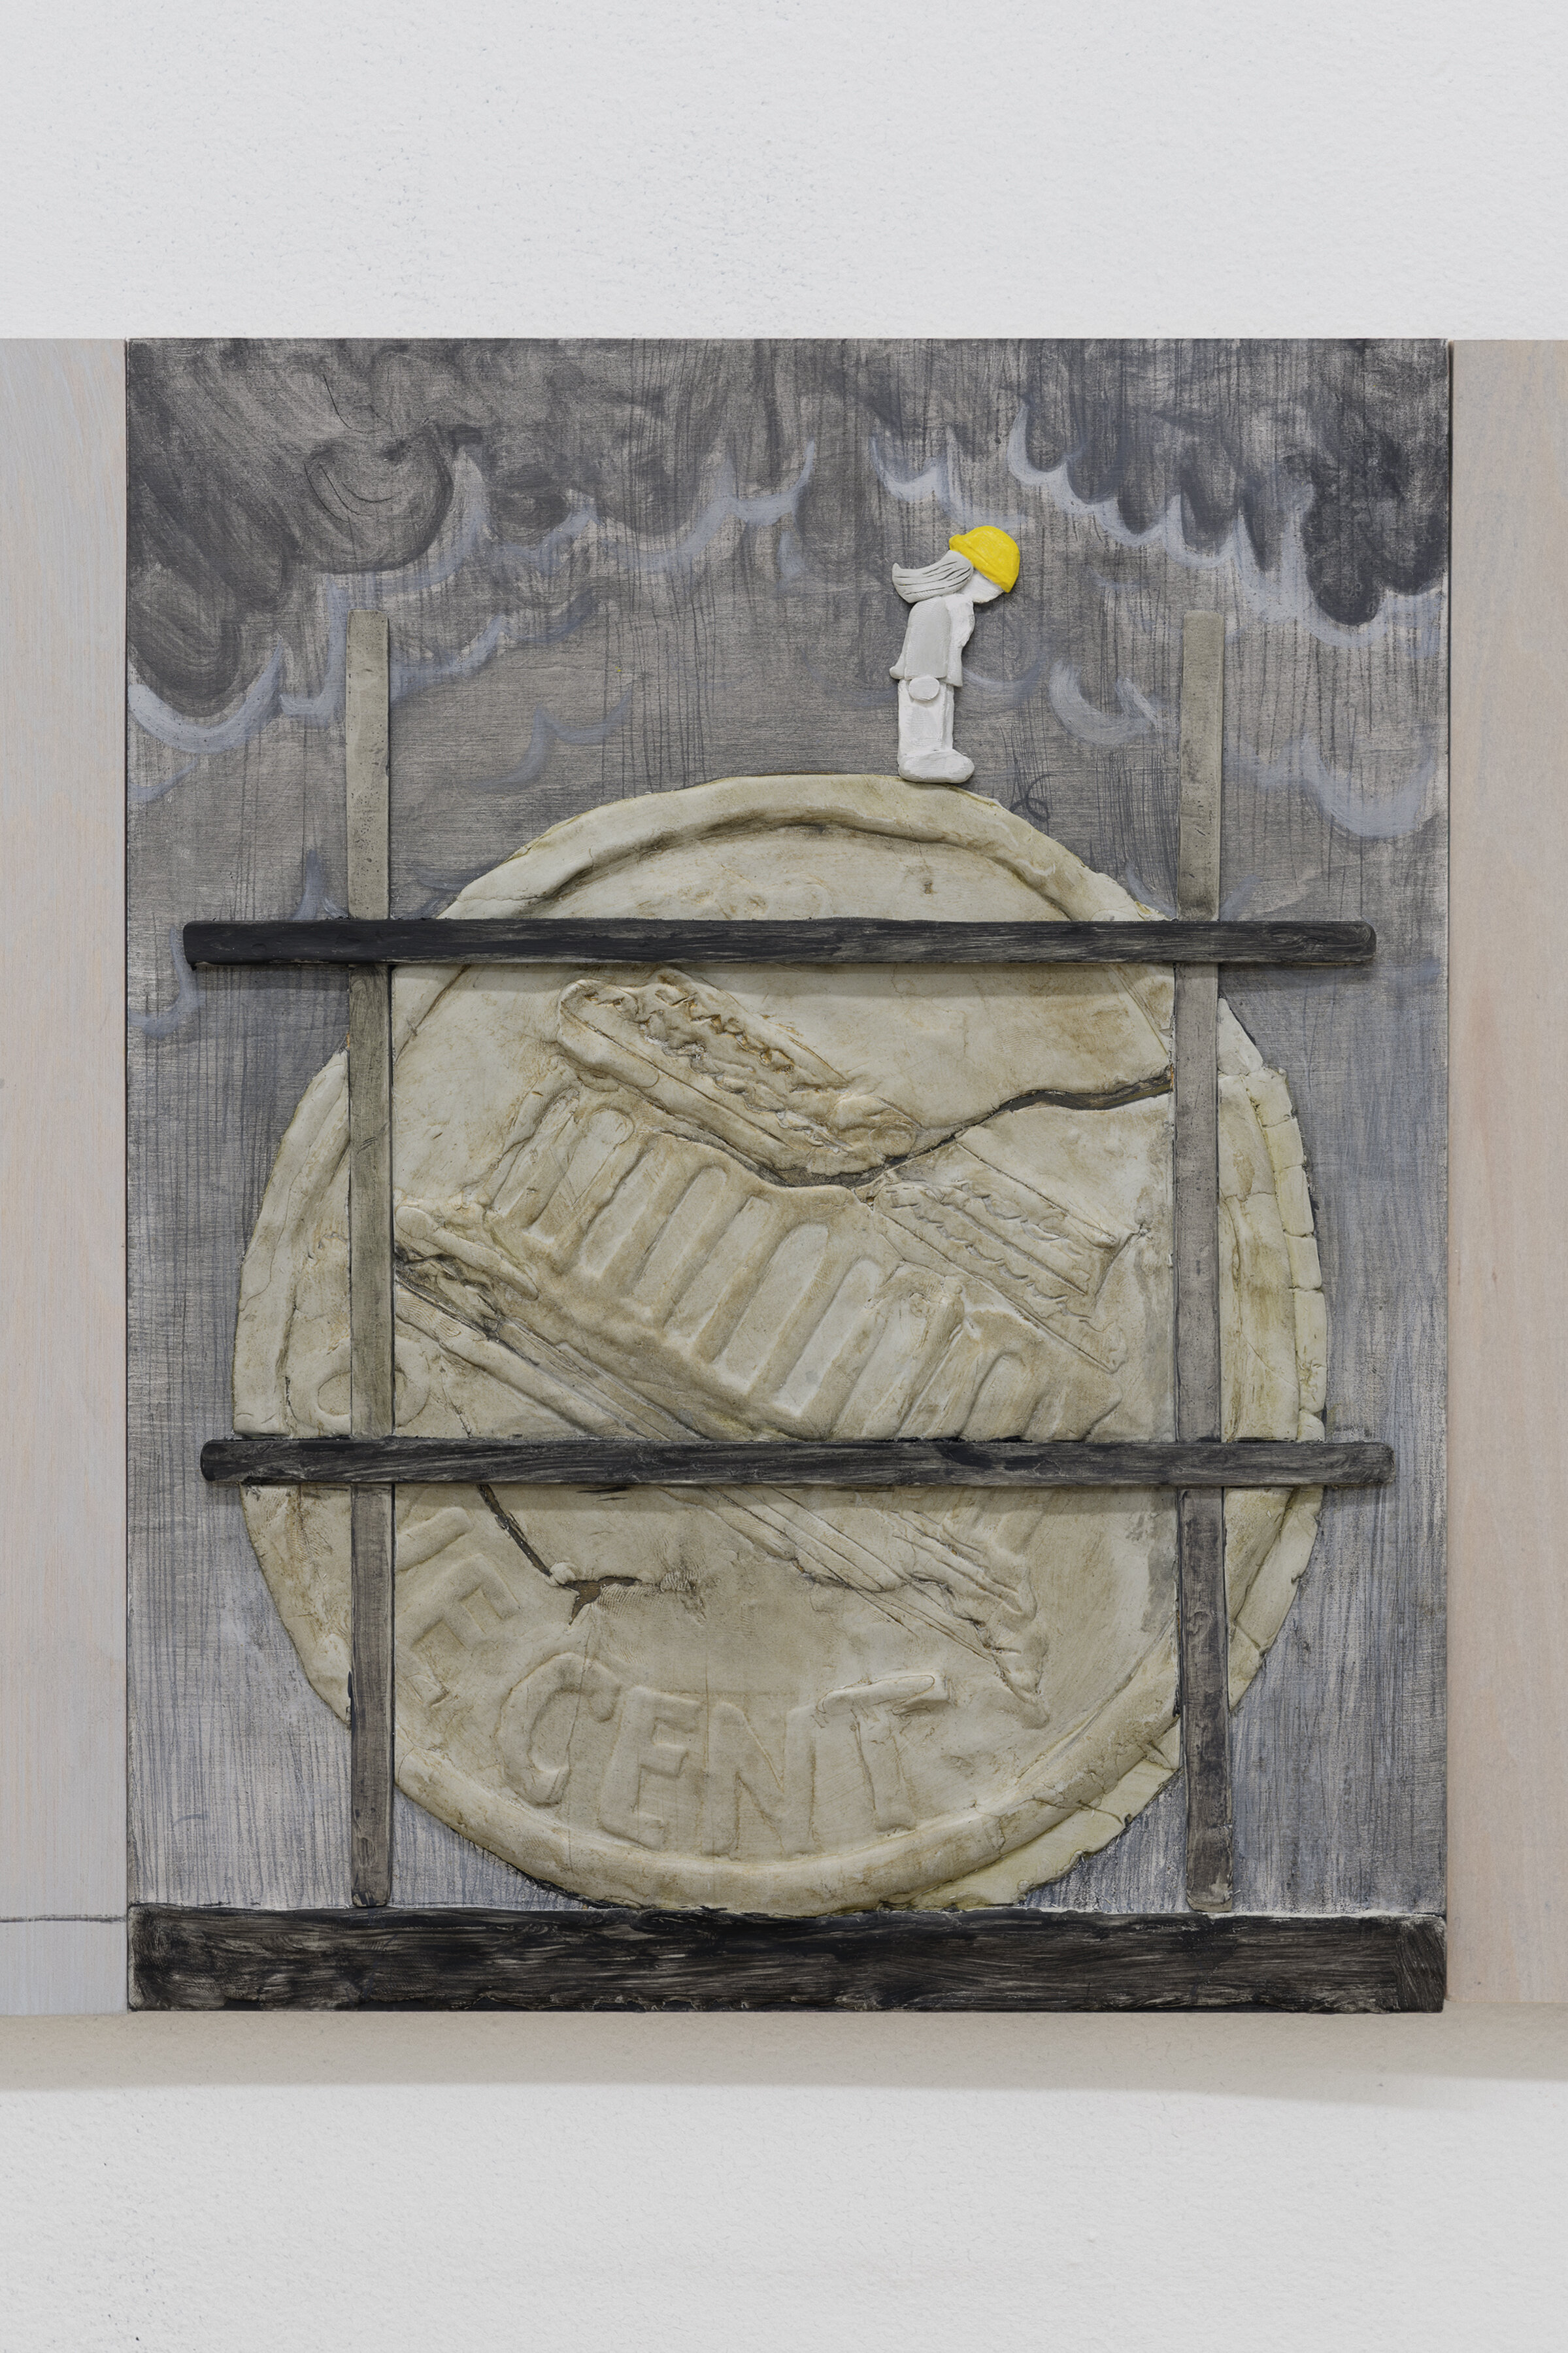  Dennis Witkin  Repairing Coin,  2020 Oil paint, acrylic paint, cal-tint, wood-stain, charcoal, graphite, epoxy clay, polymer clay on panel 14 x 11 inches 